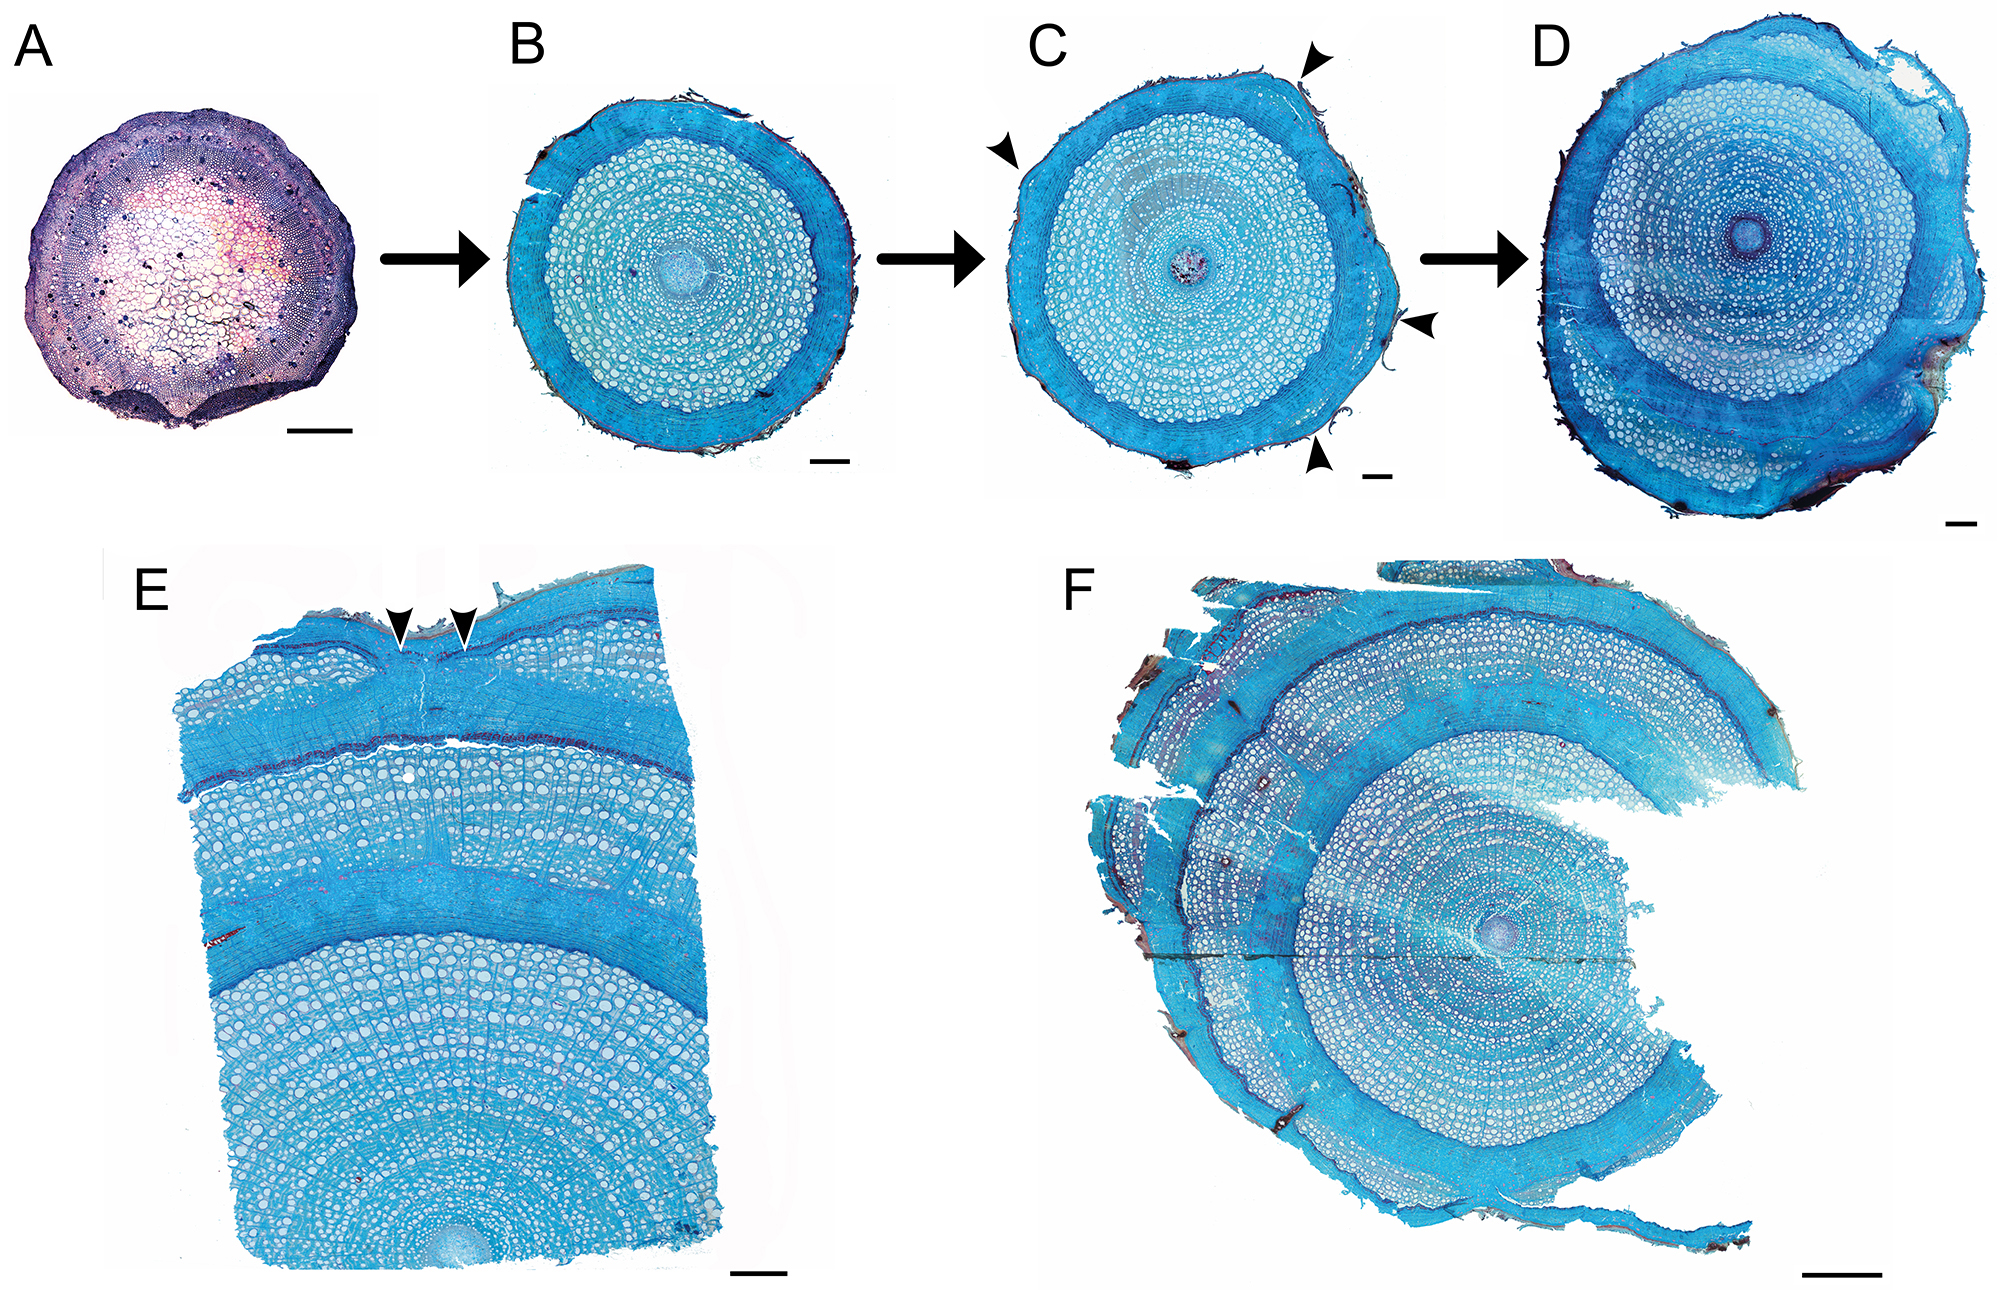 Adapted from Fig. 2 of Nejapa et al. (2021). Transverse sections of the ontogeny of *Wisteria sinensis* stems. From the onset of secondary growth (A) to stems with two successive cambia (E and F).